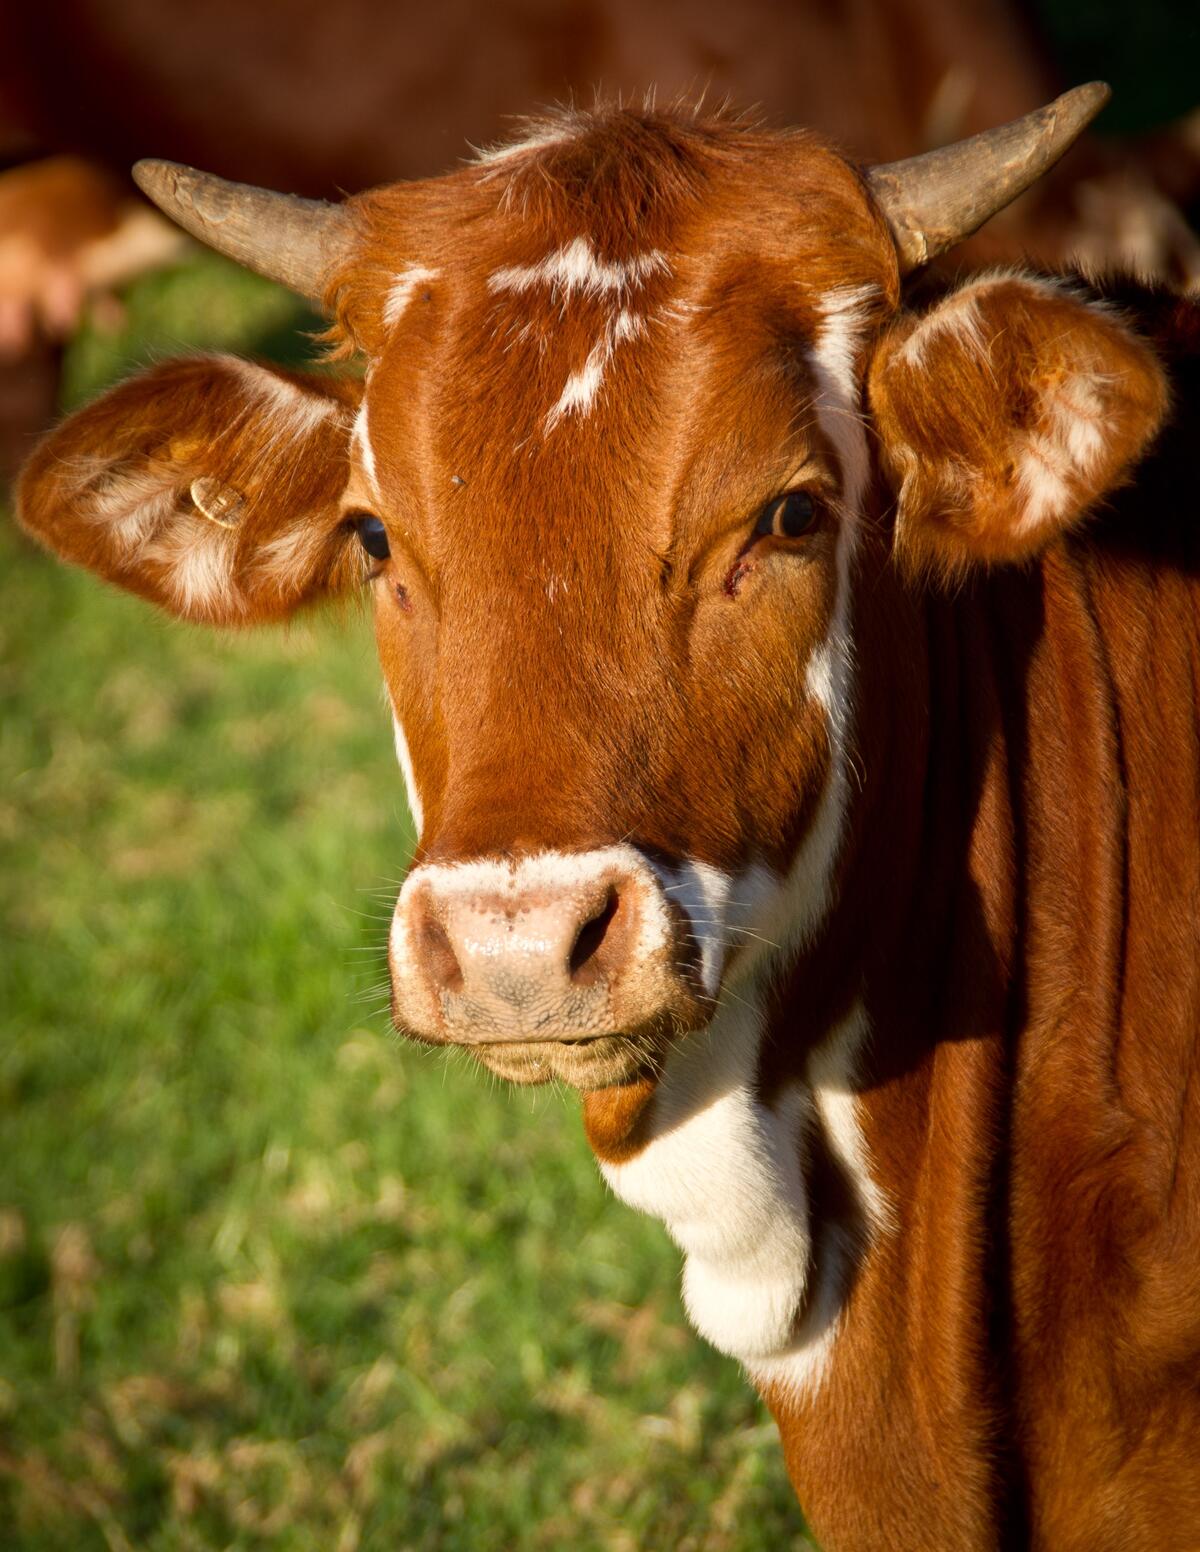 A red cow with horns